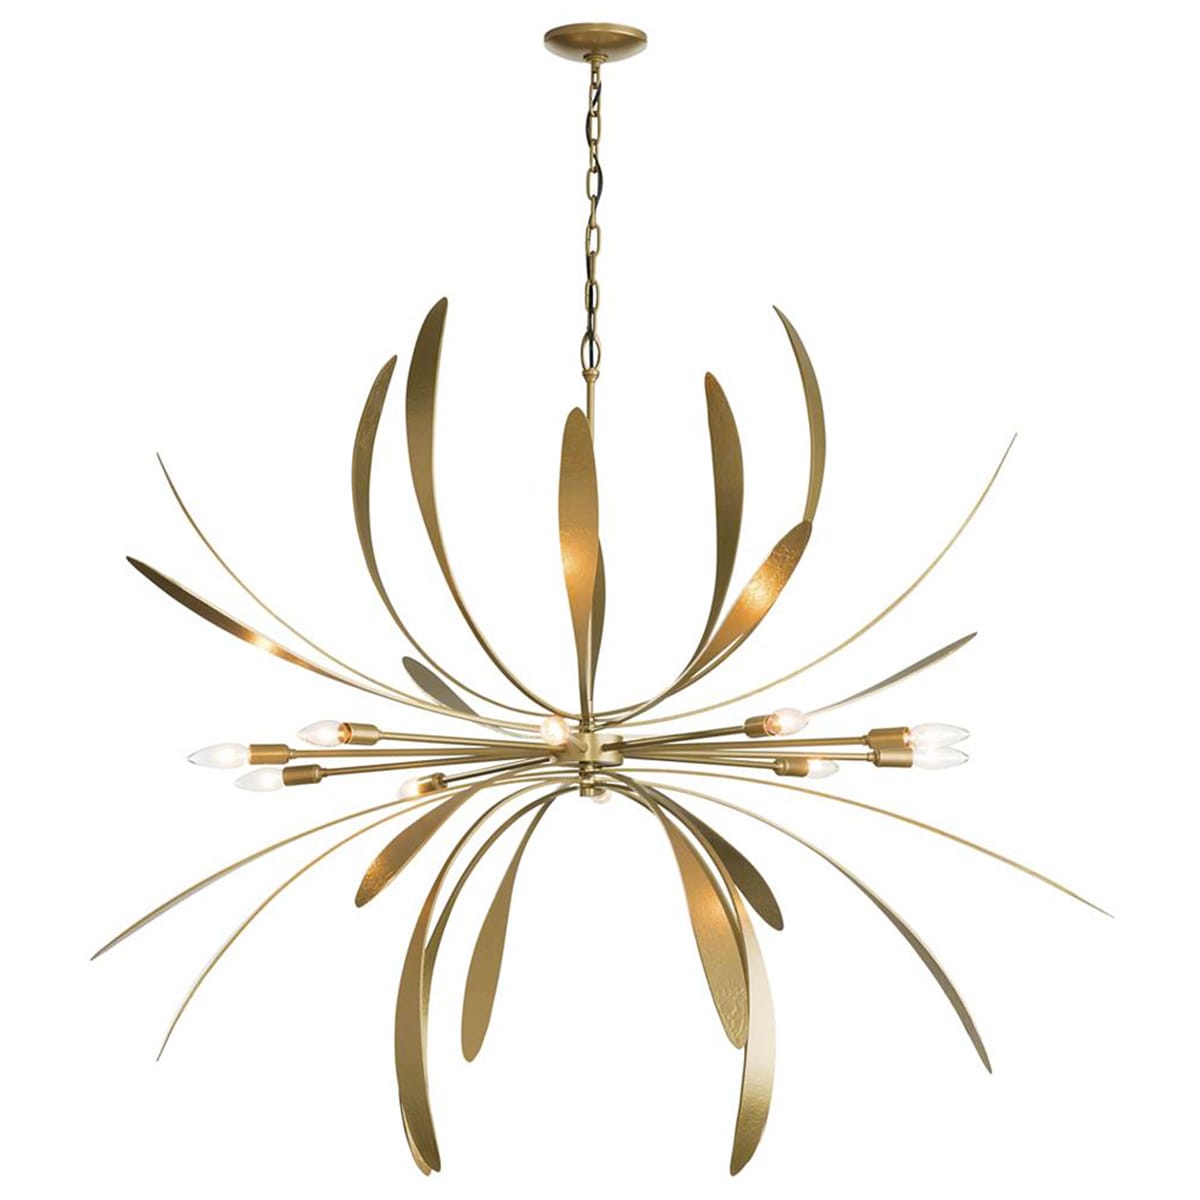 NEW & EXCLUSIVE: Dahlia Chandelier by Hubbardton Forge